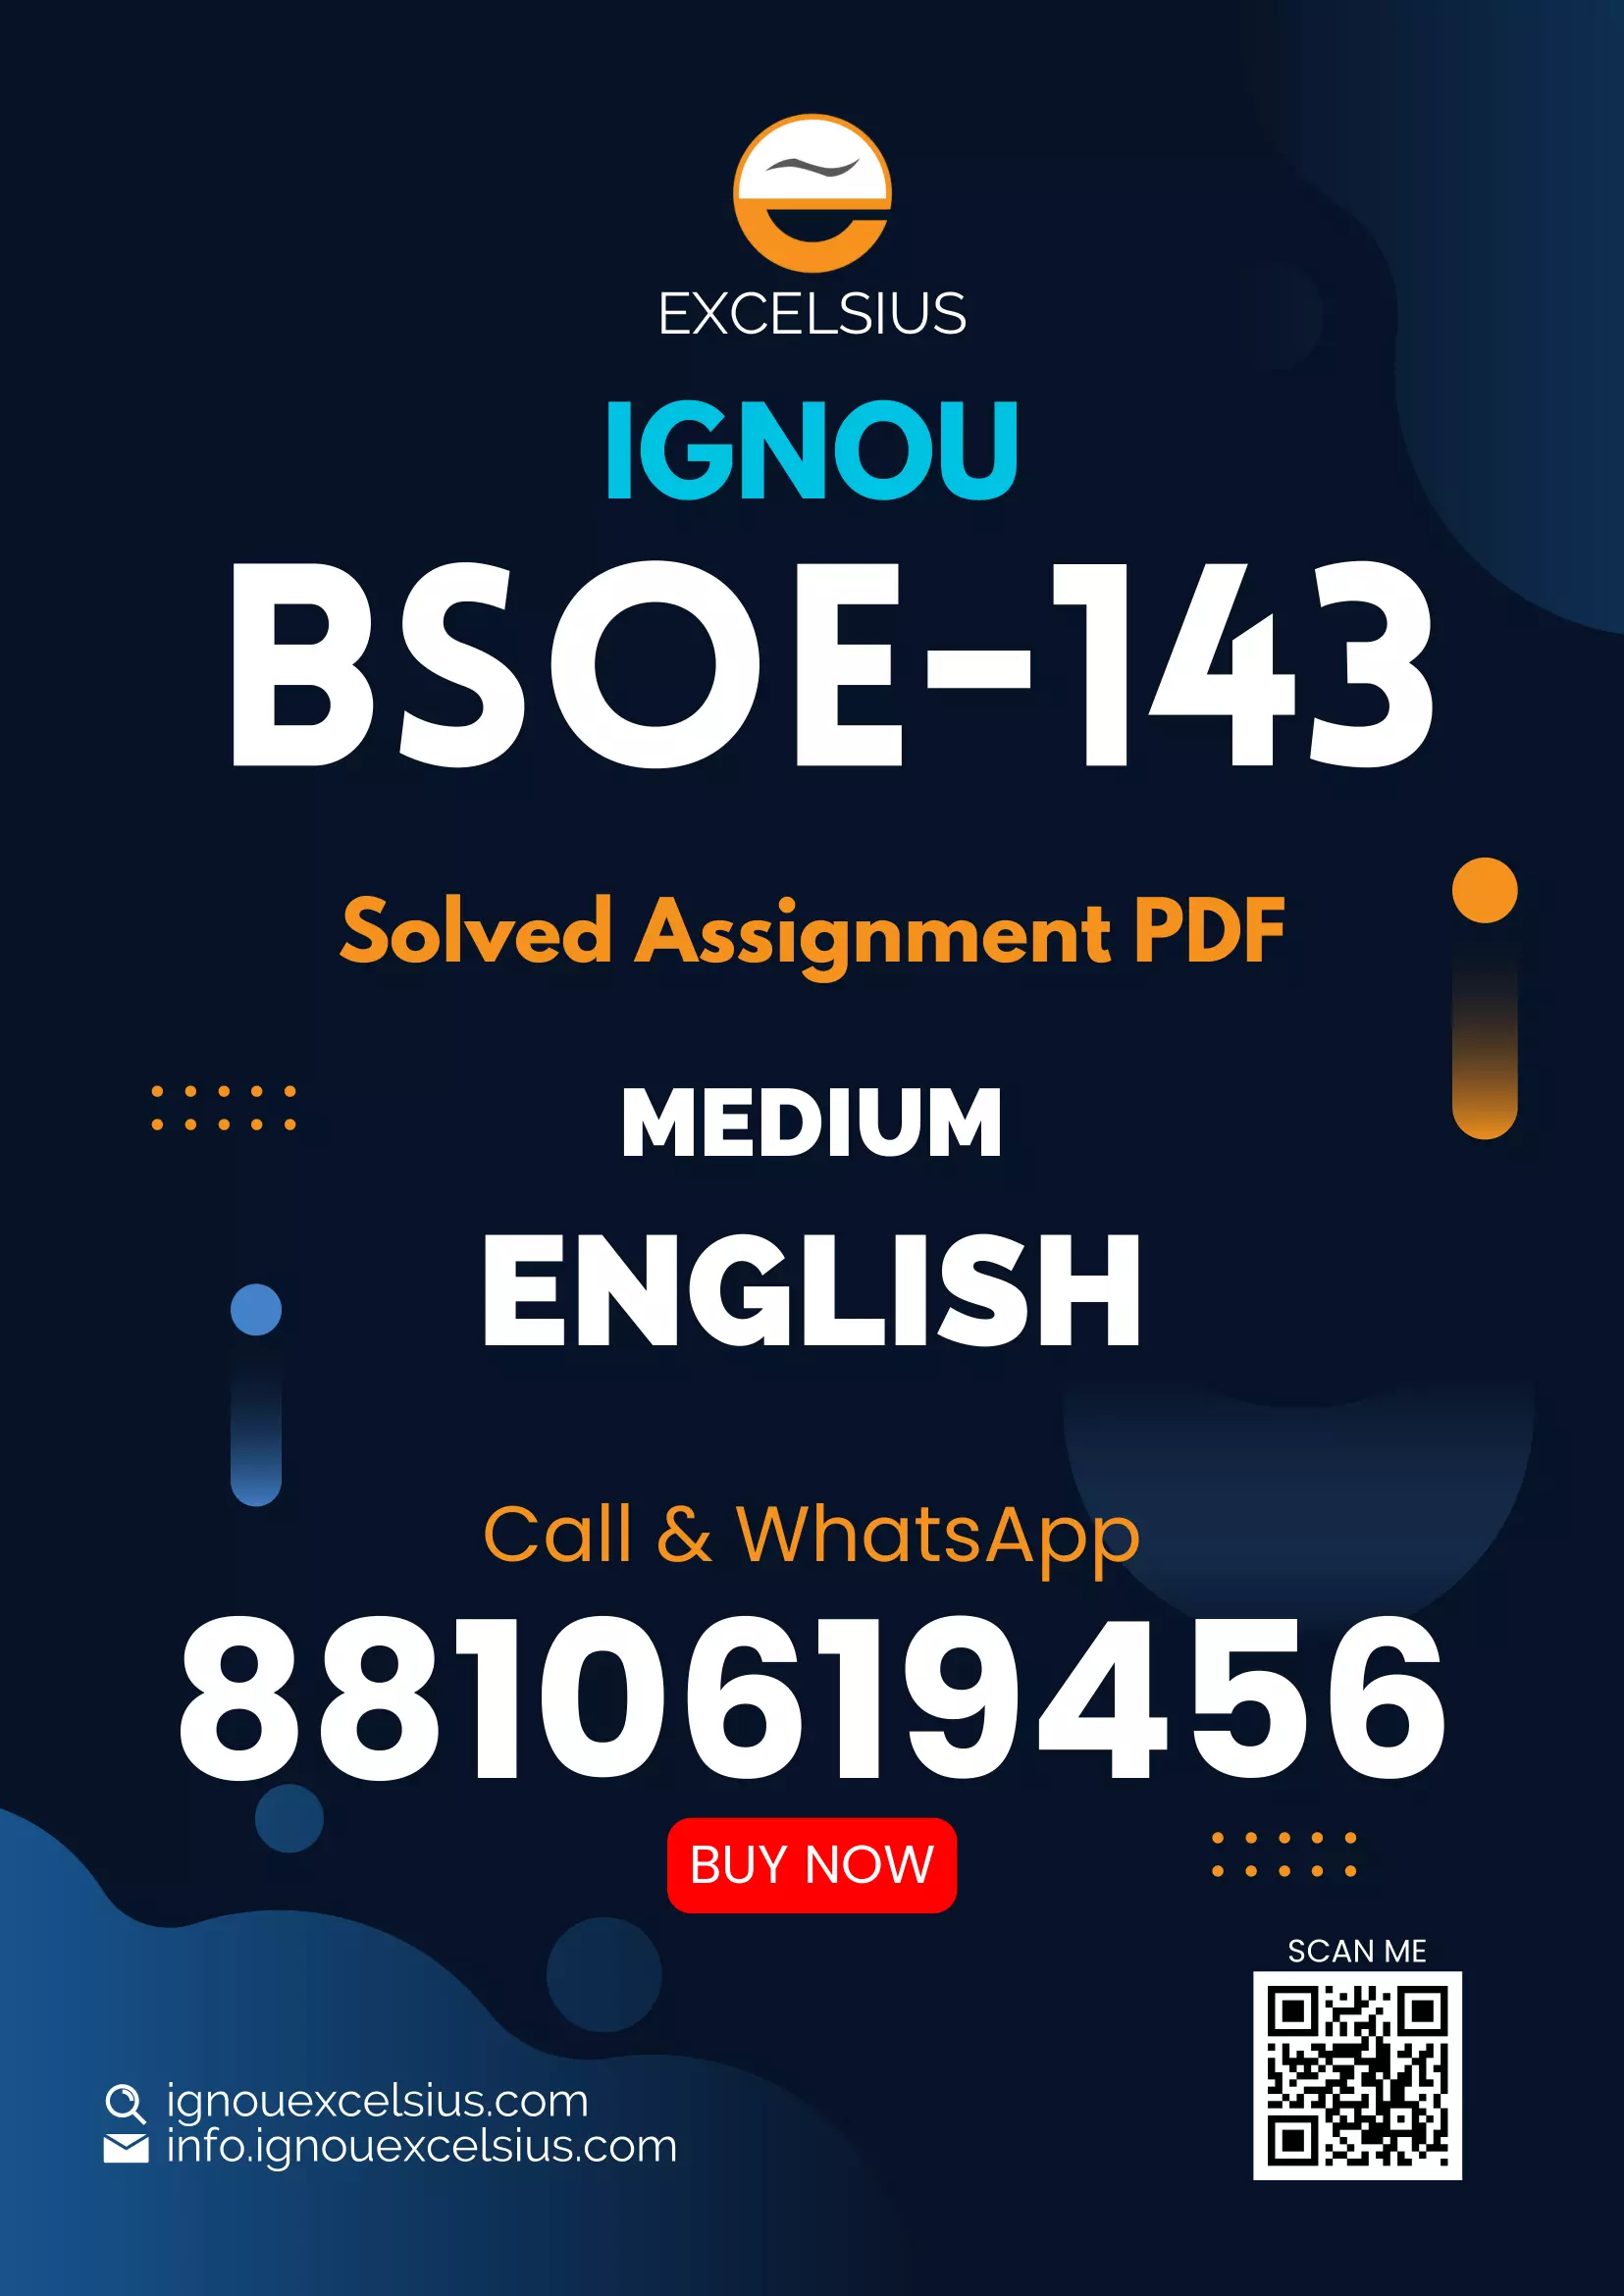 IGNOU BSOE-143 - Environmental Sociology, Latest Solved Assignment-July 2023 - January 2024